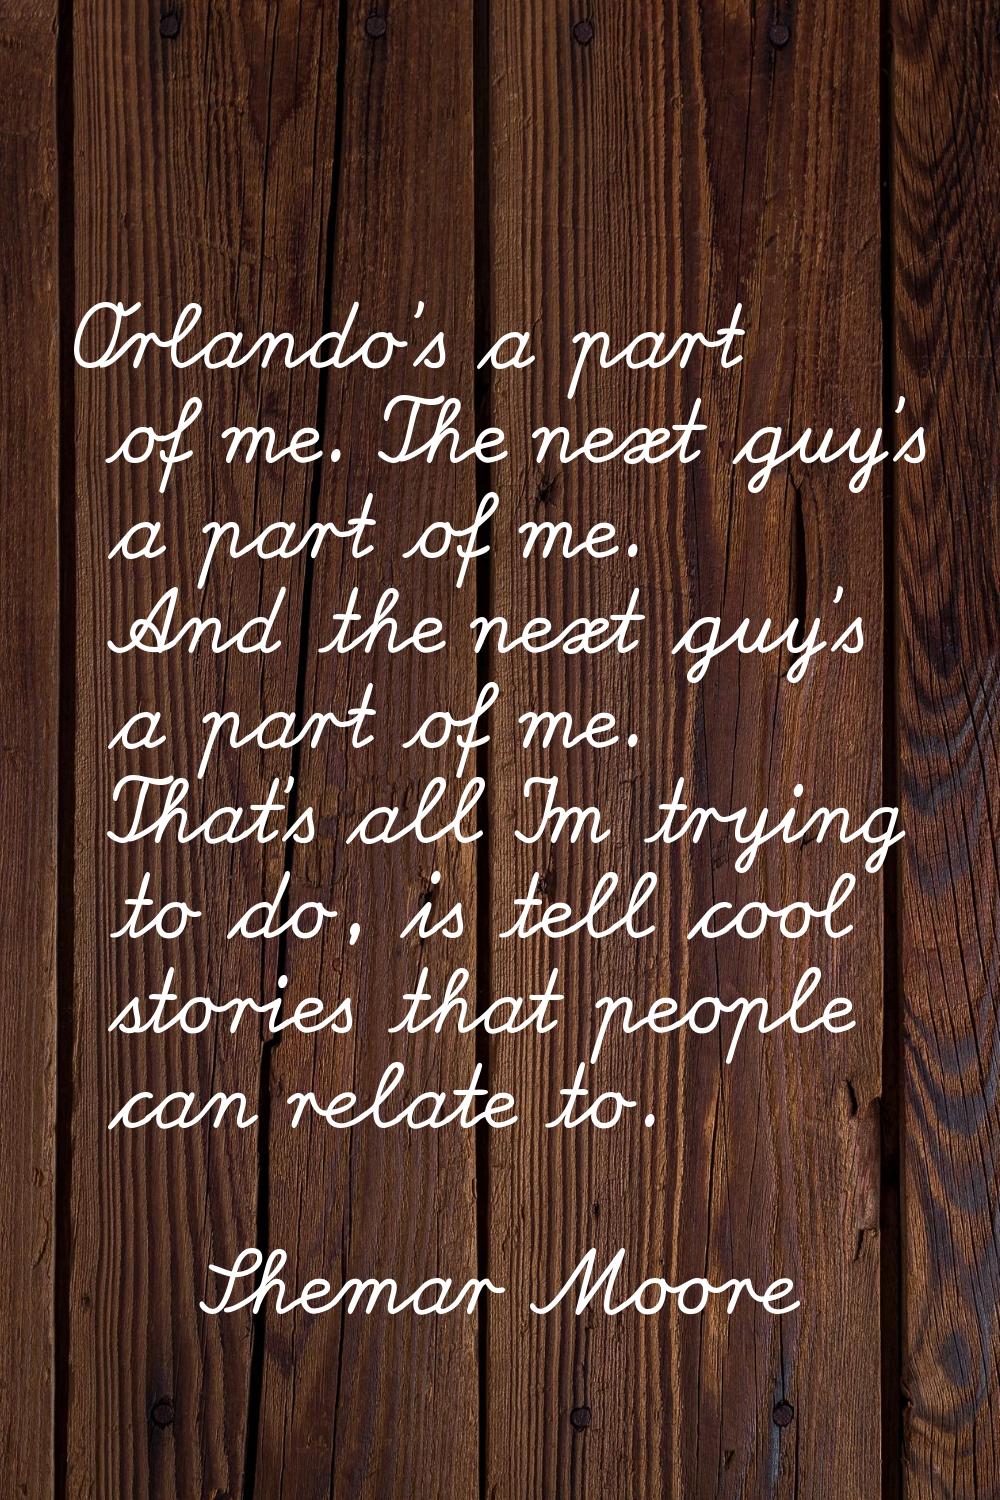 Orlando's a part of me. The next guy's a part of me. And the next guy's a part of me. That's all I'